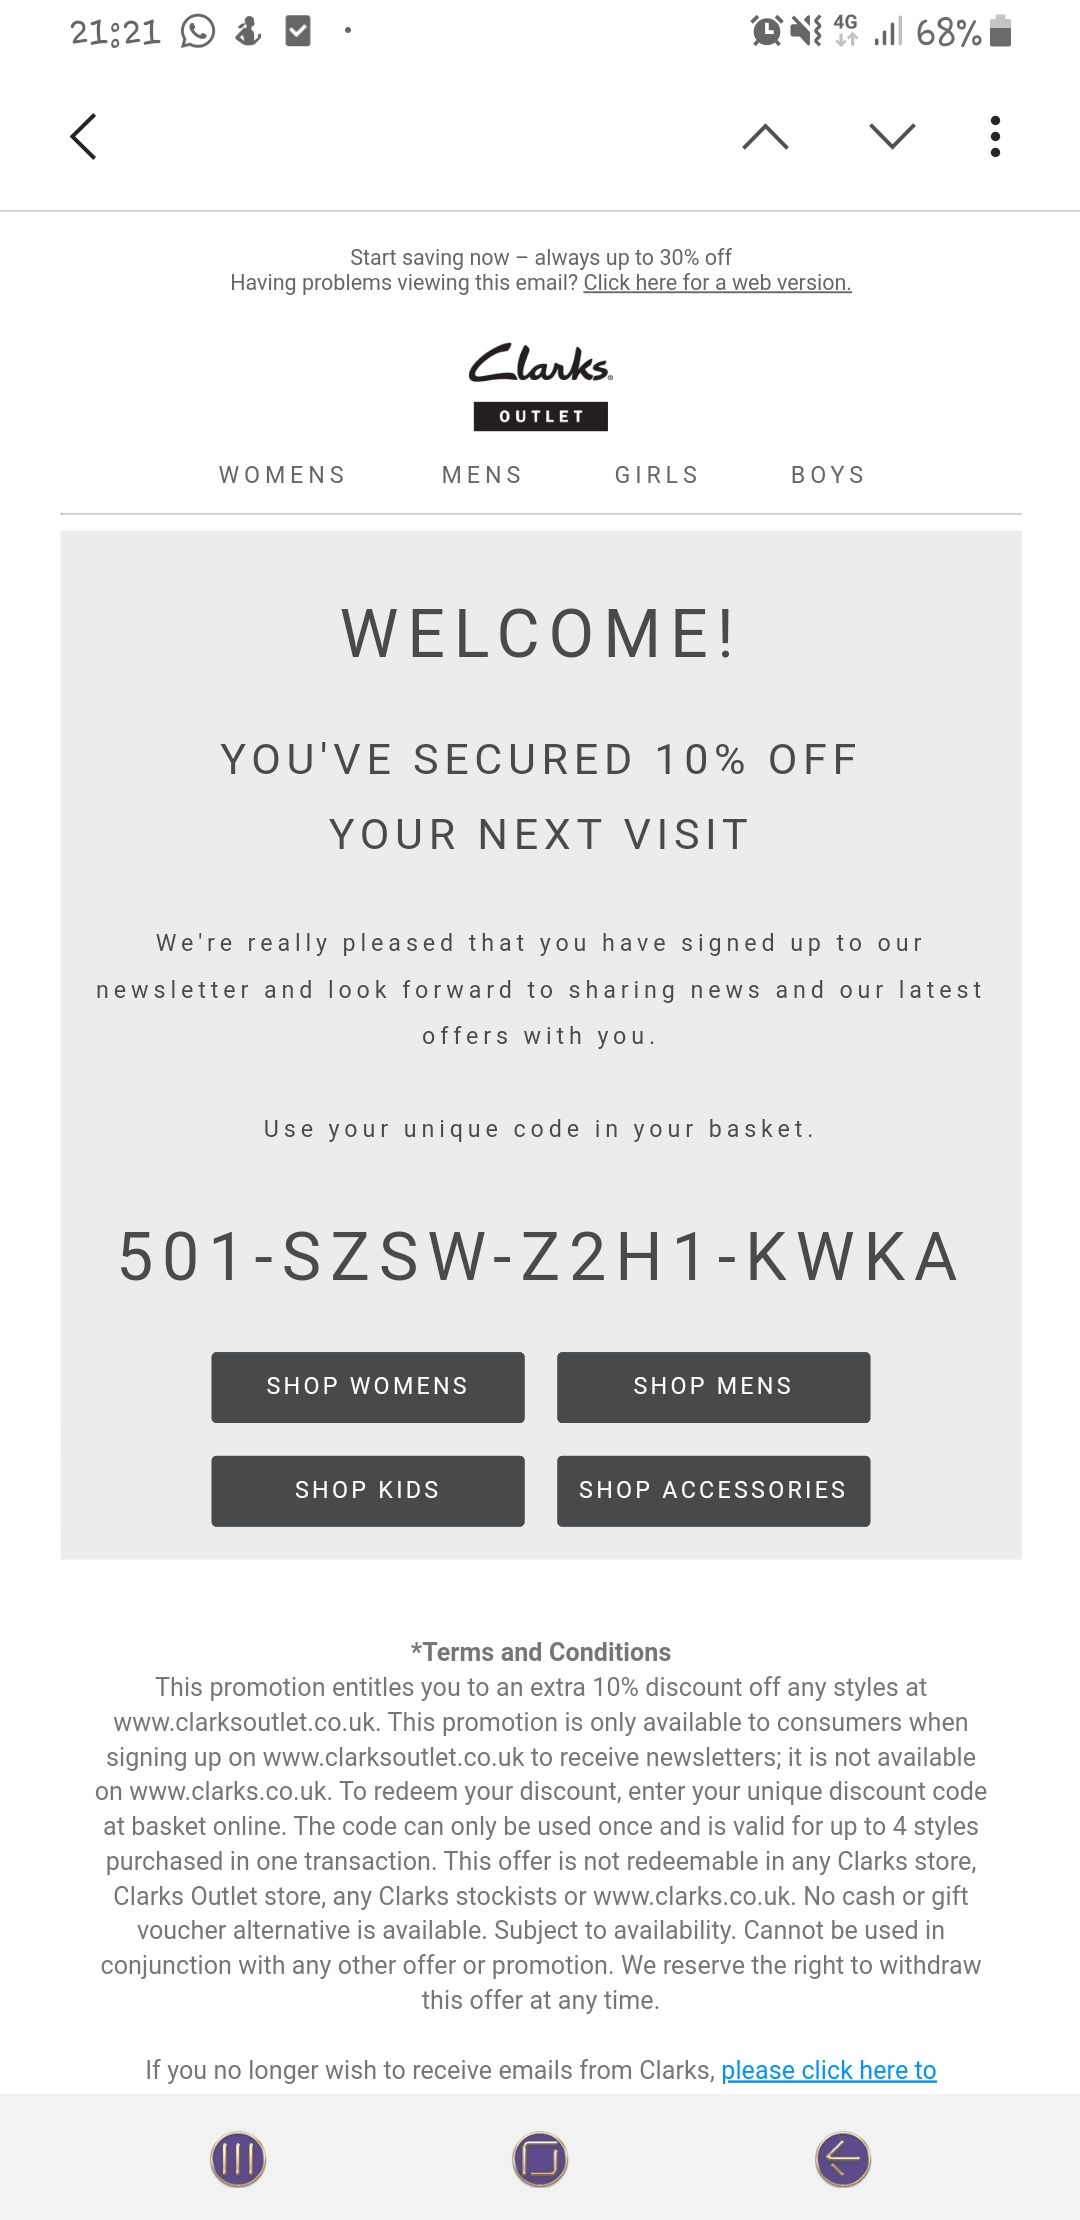 clarks outlet promo code oct 2018